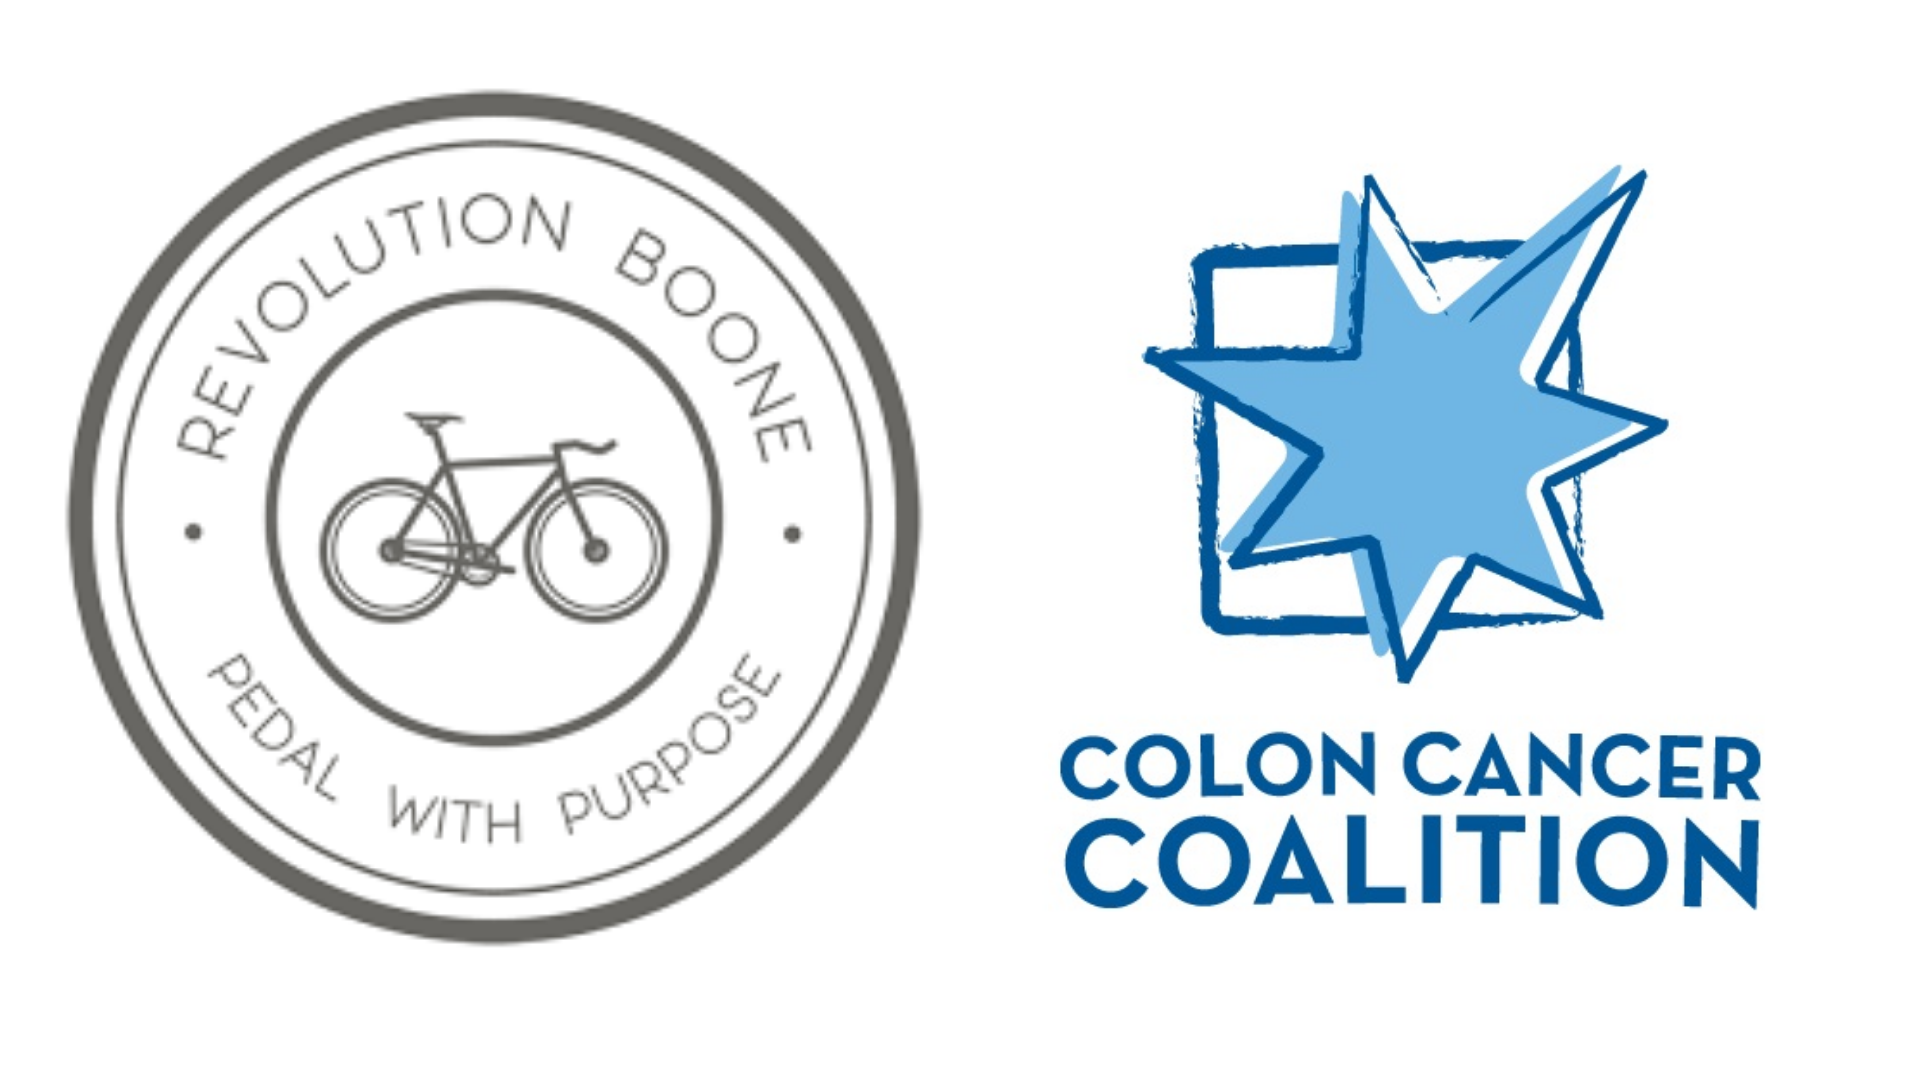 Side by side logo of revolution boone and colon caner coalition